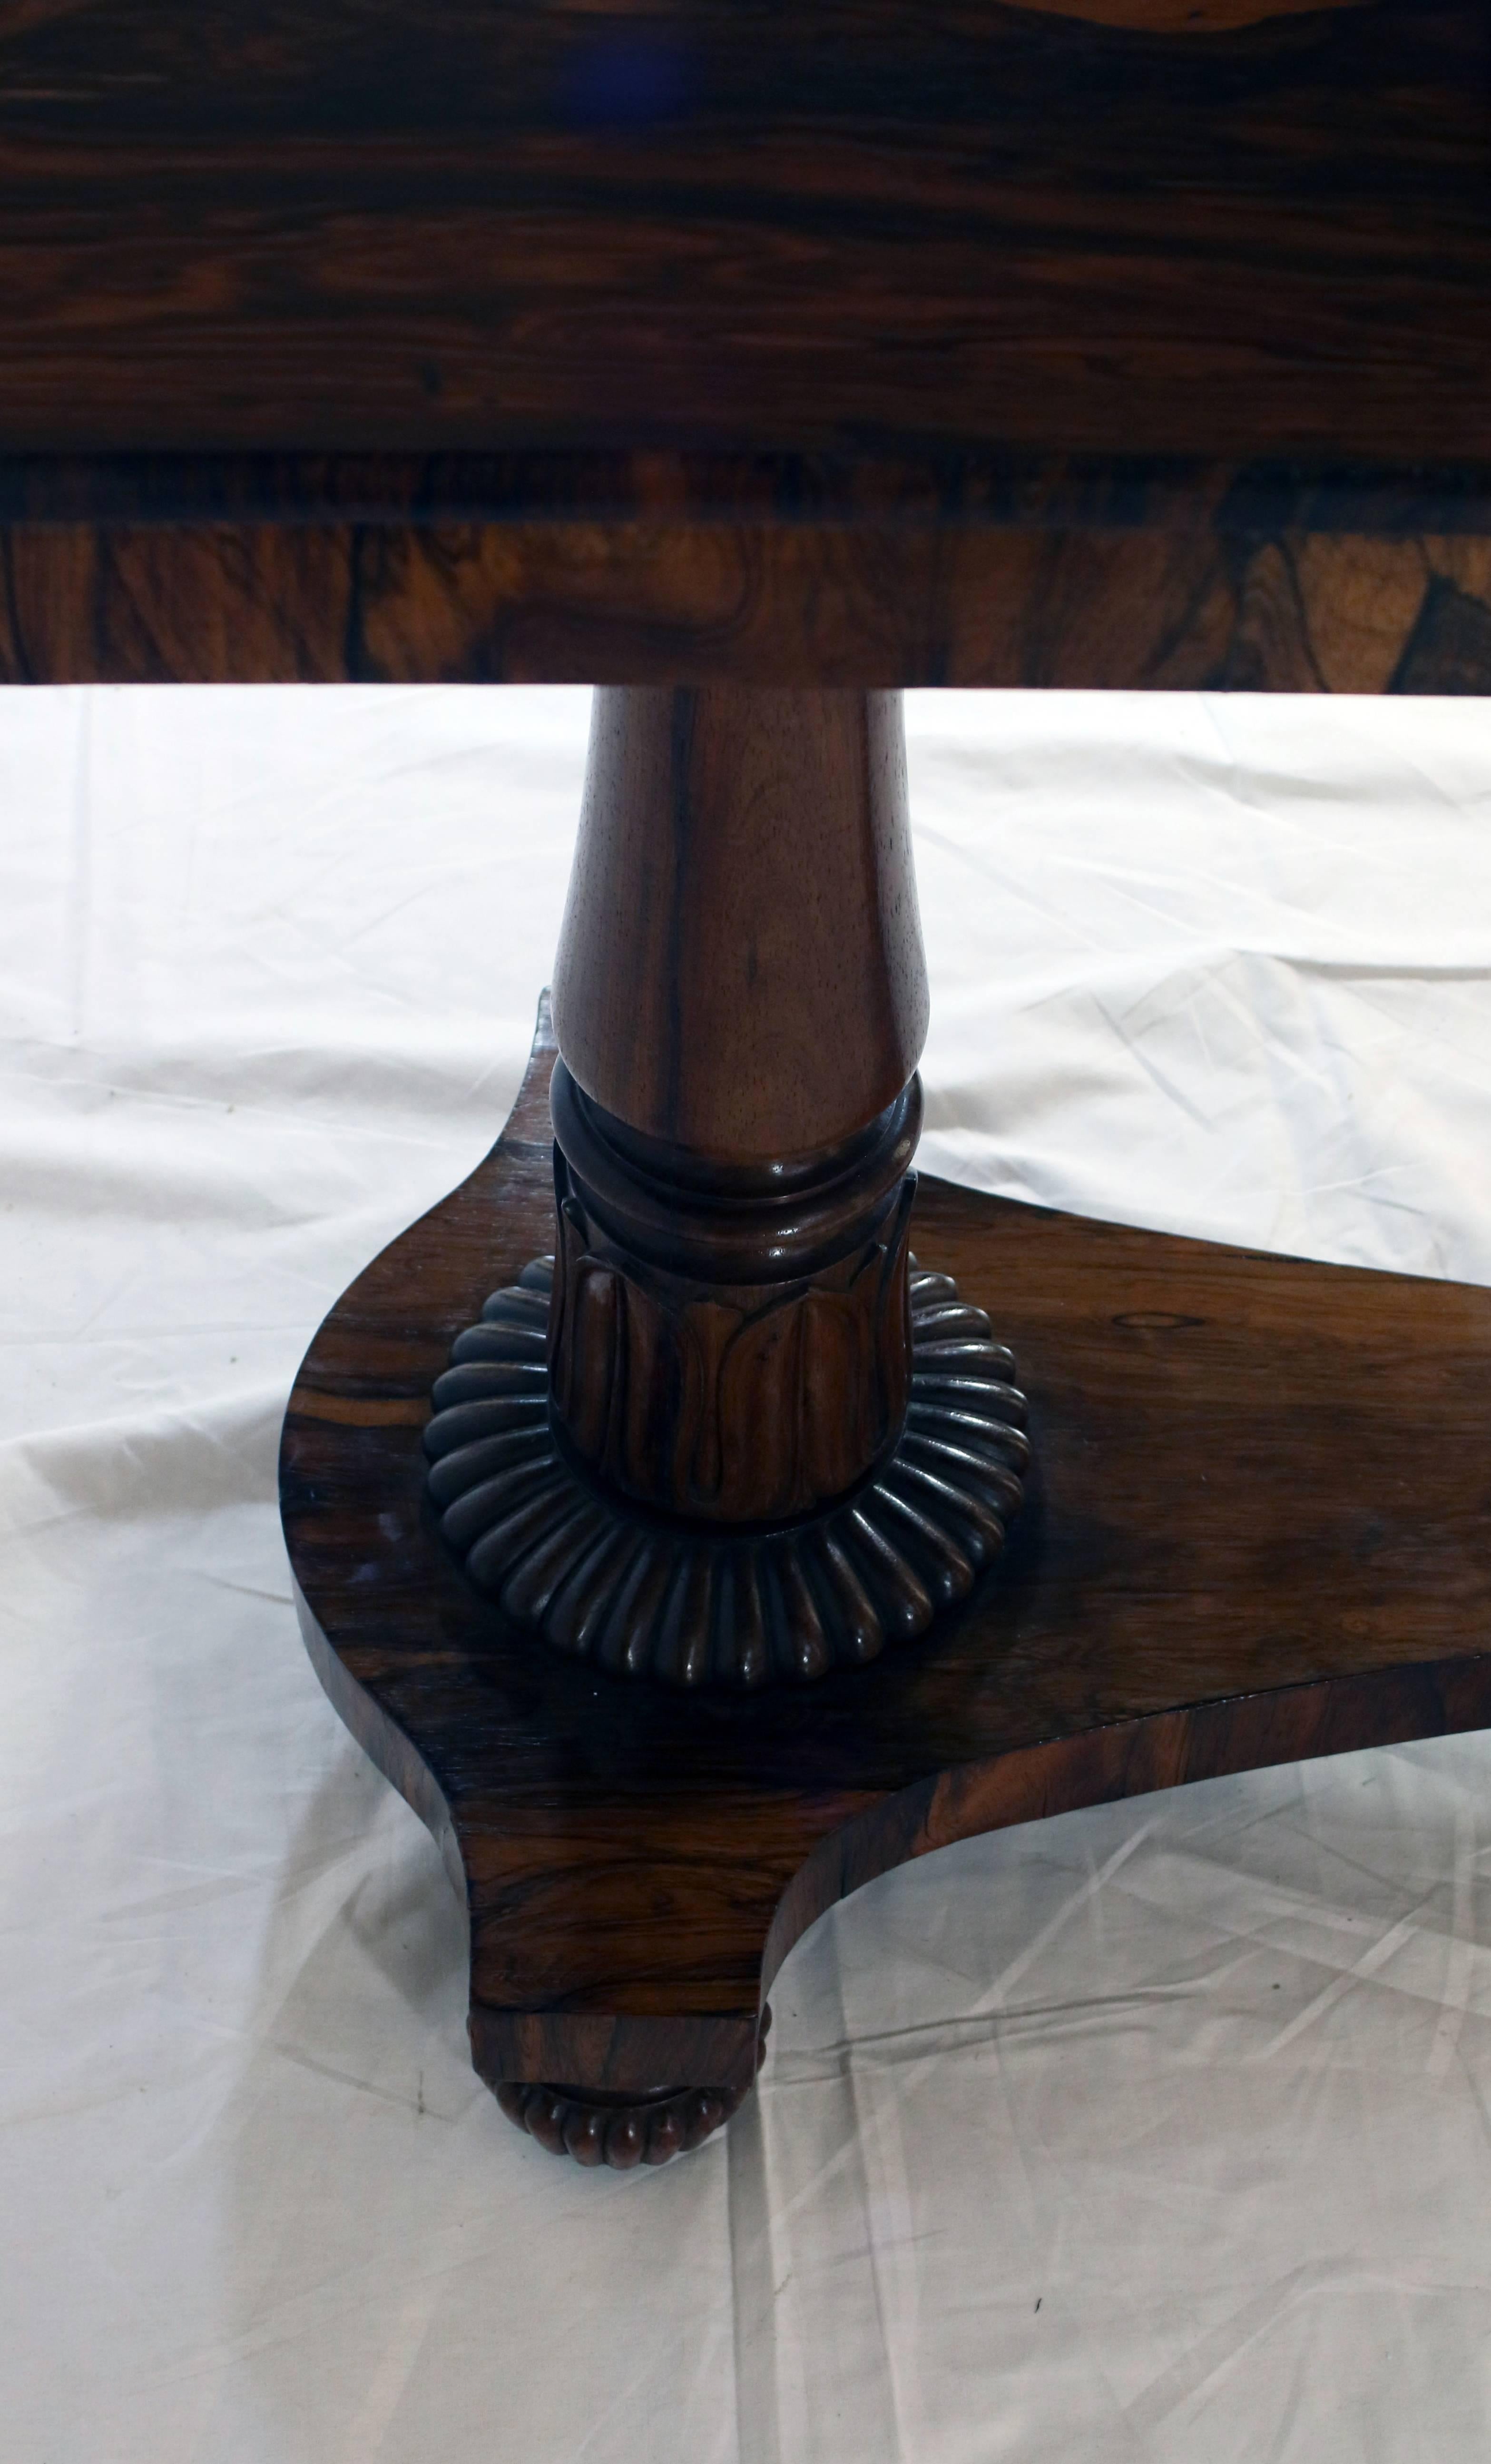 Carved 19th Century Rosewood Regency Duo Angle Adjustable Bookrest Reading Table For Sale